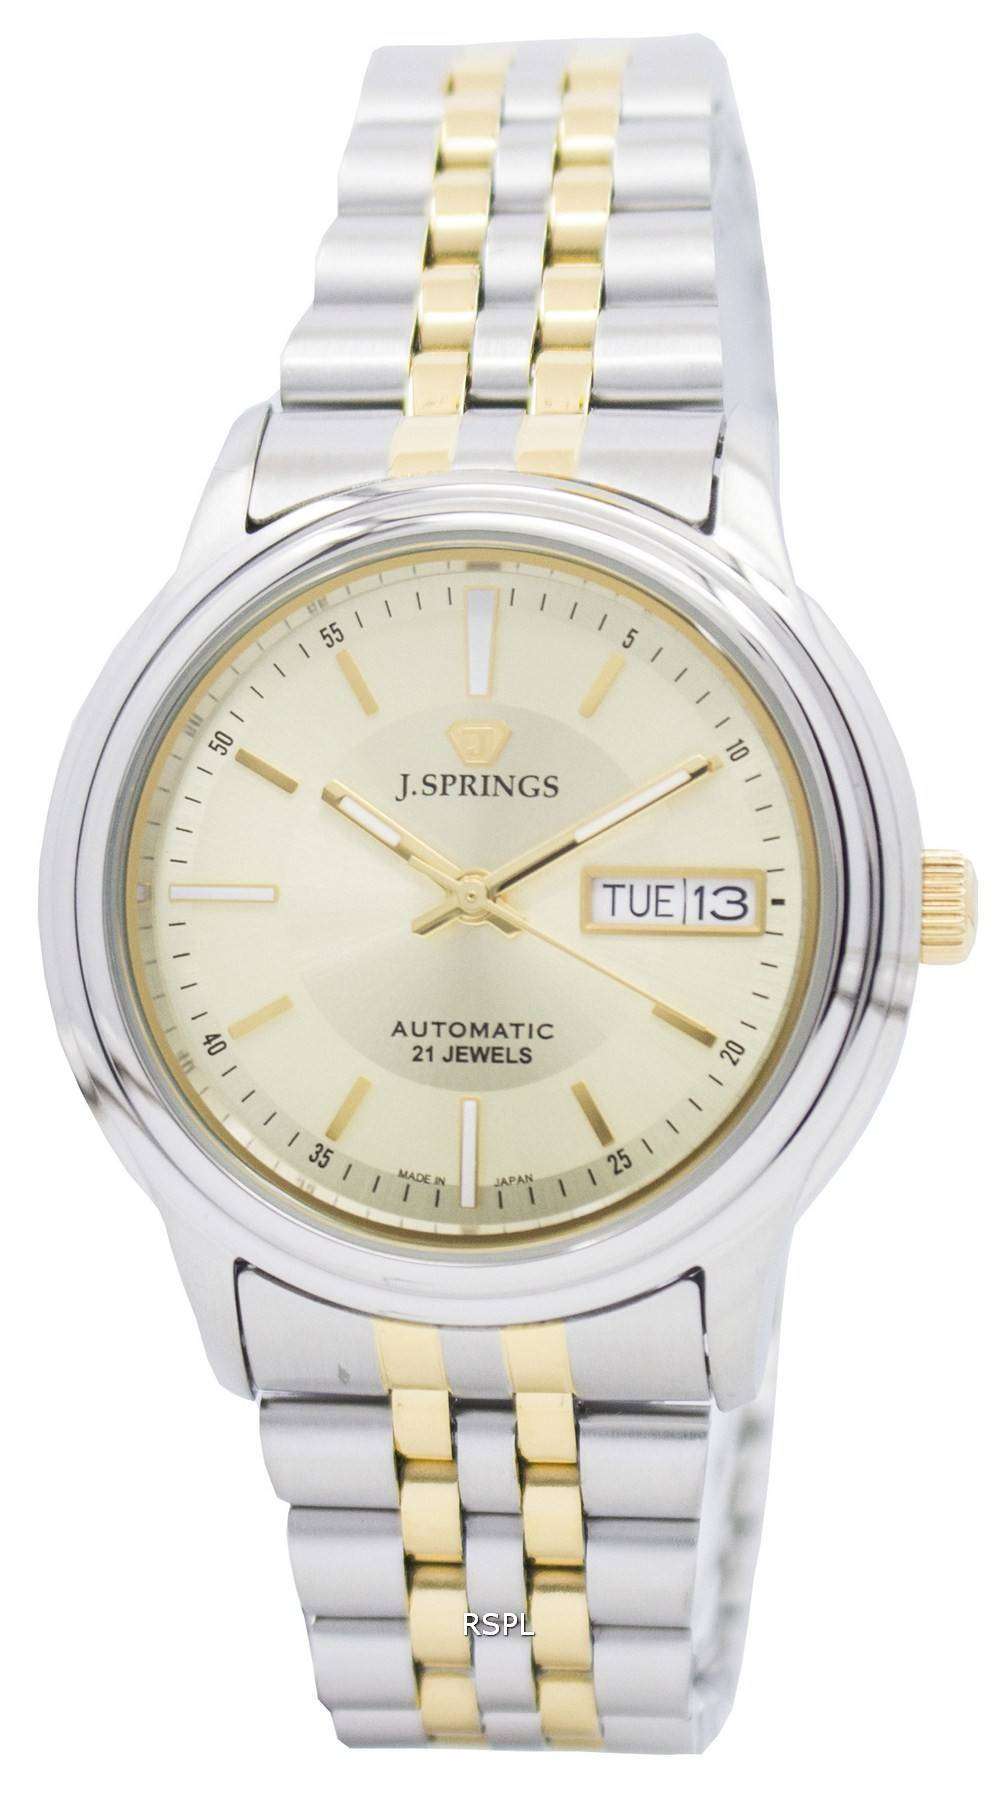  by Seiko Automatic 21 Jewels Japan Made BEB540 Men's Watch